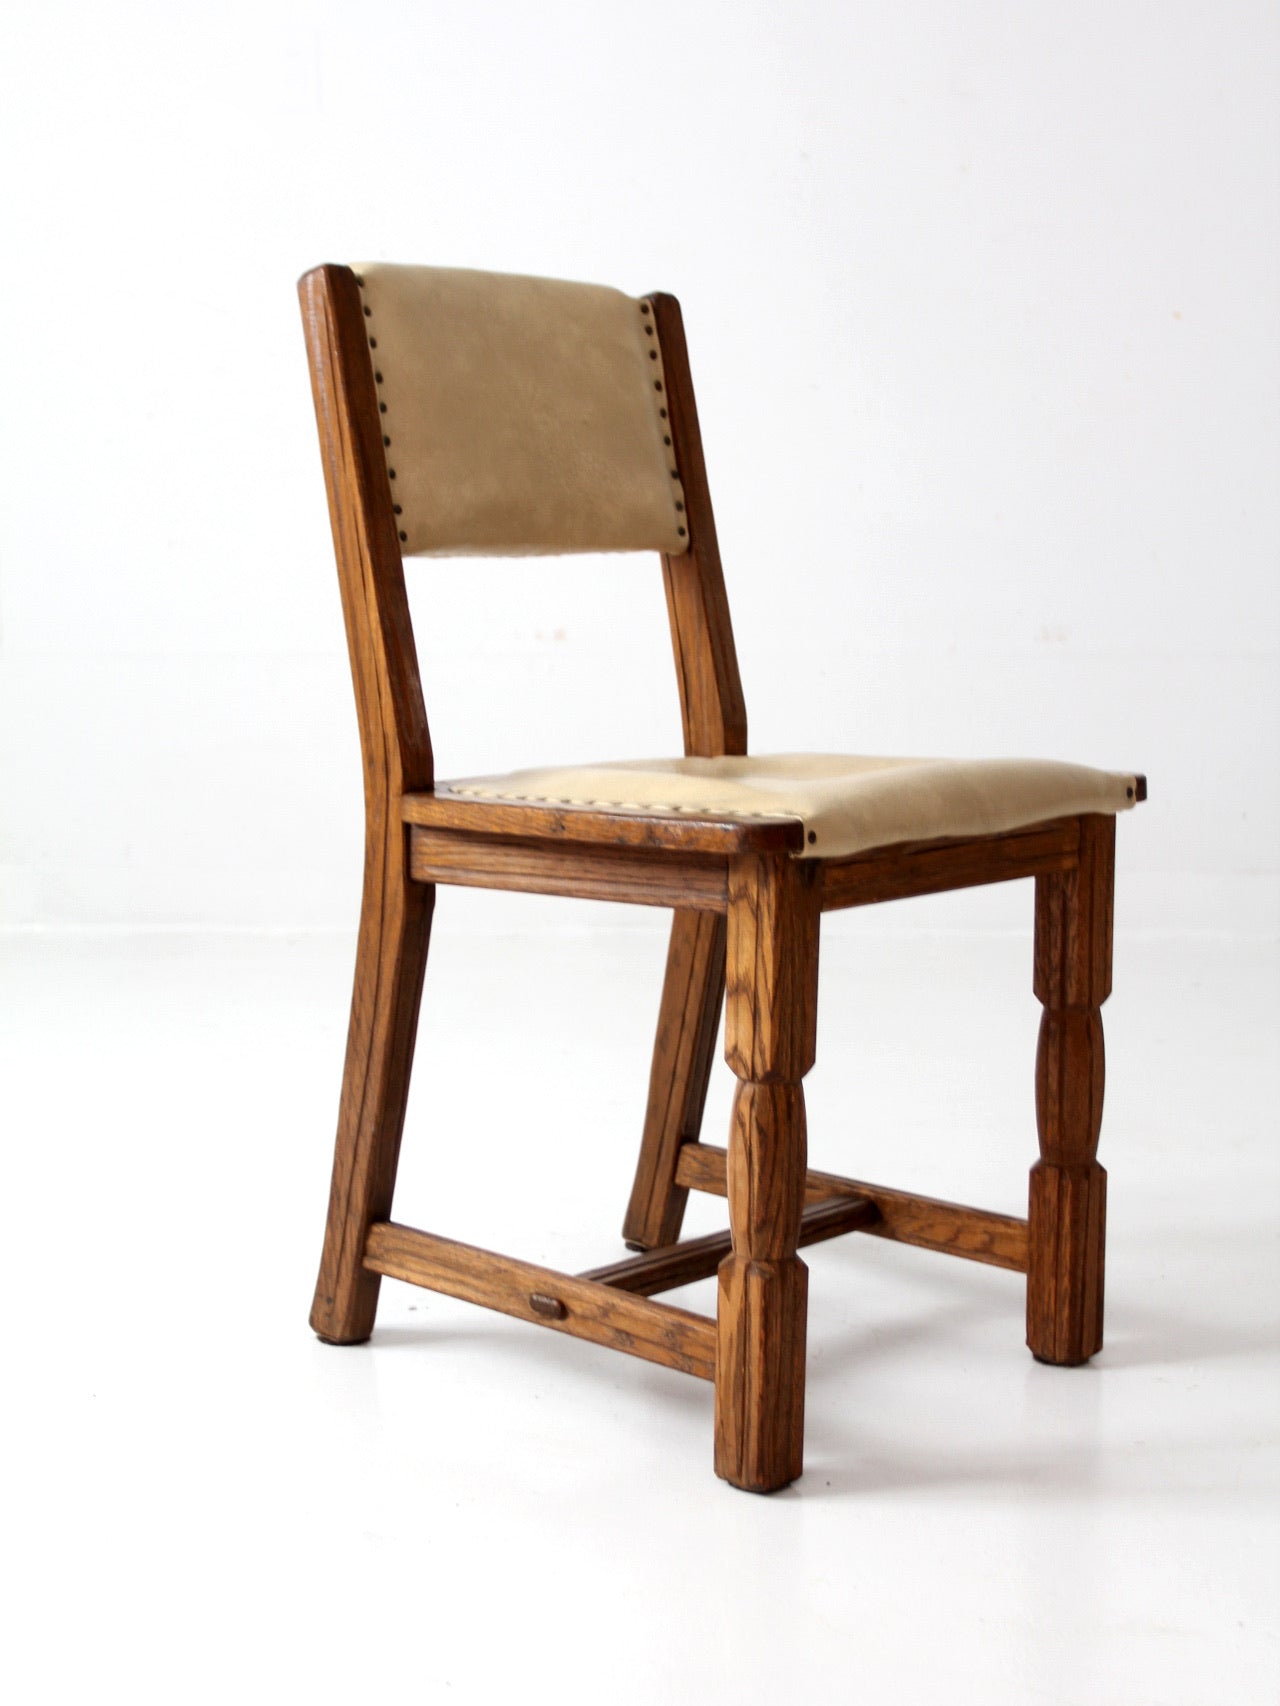 vintage Mission style side chair